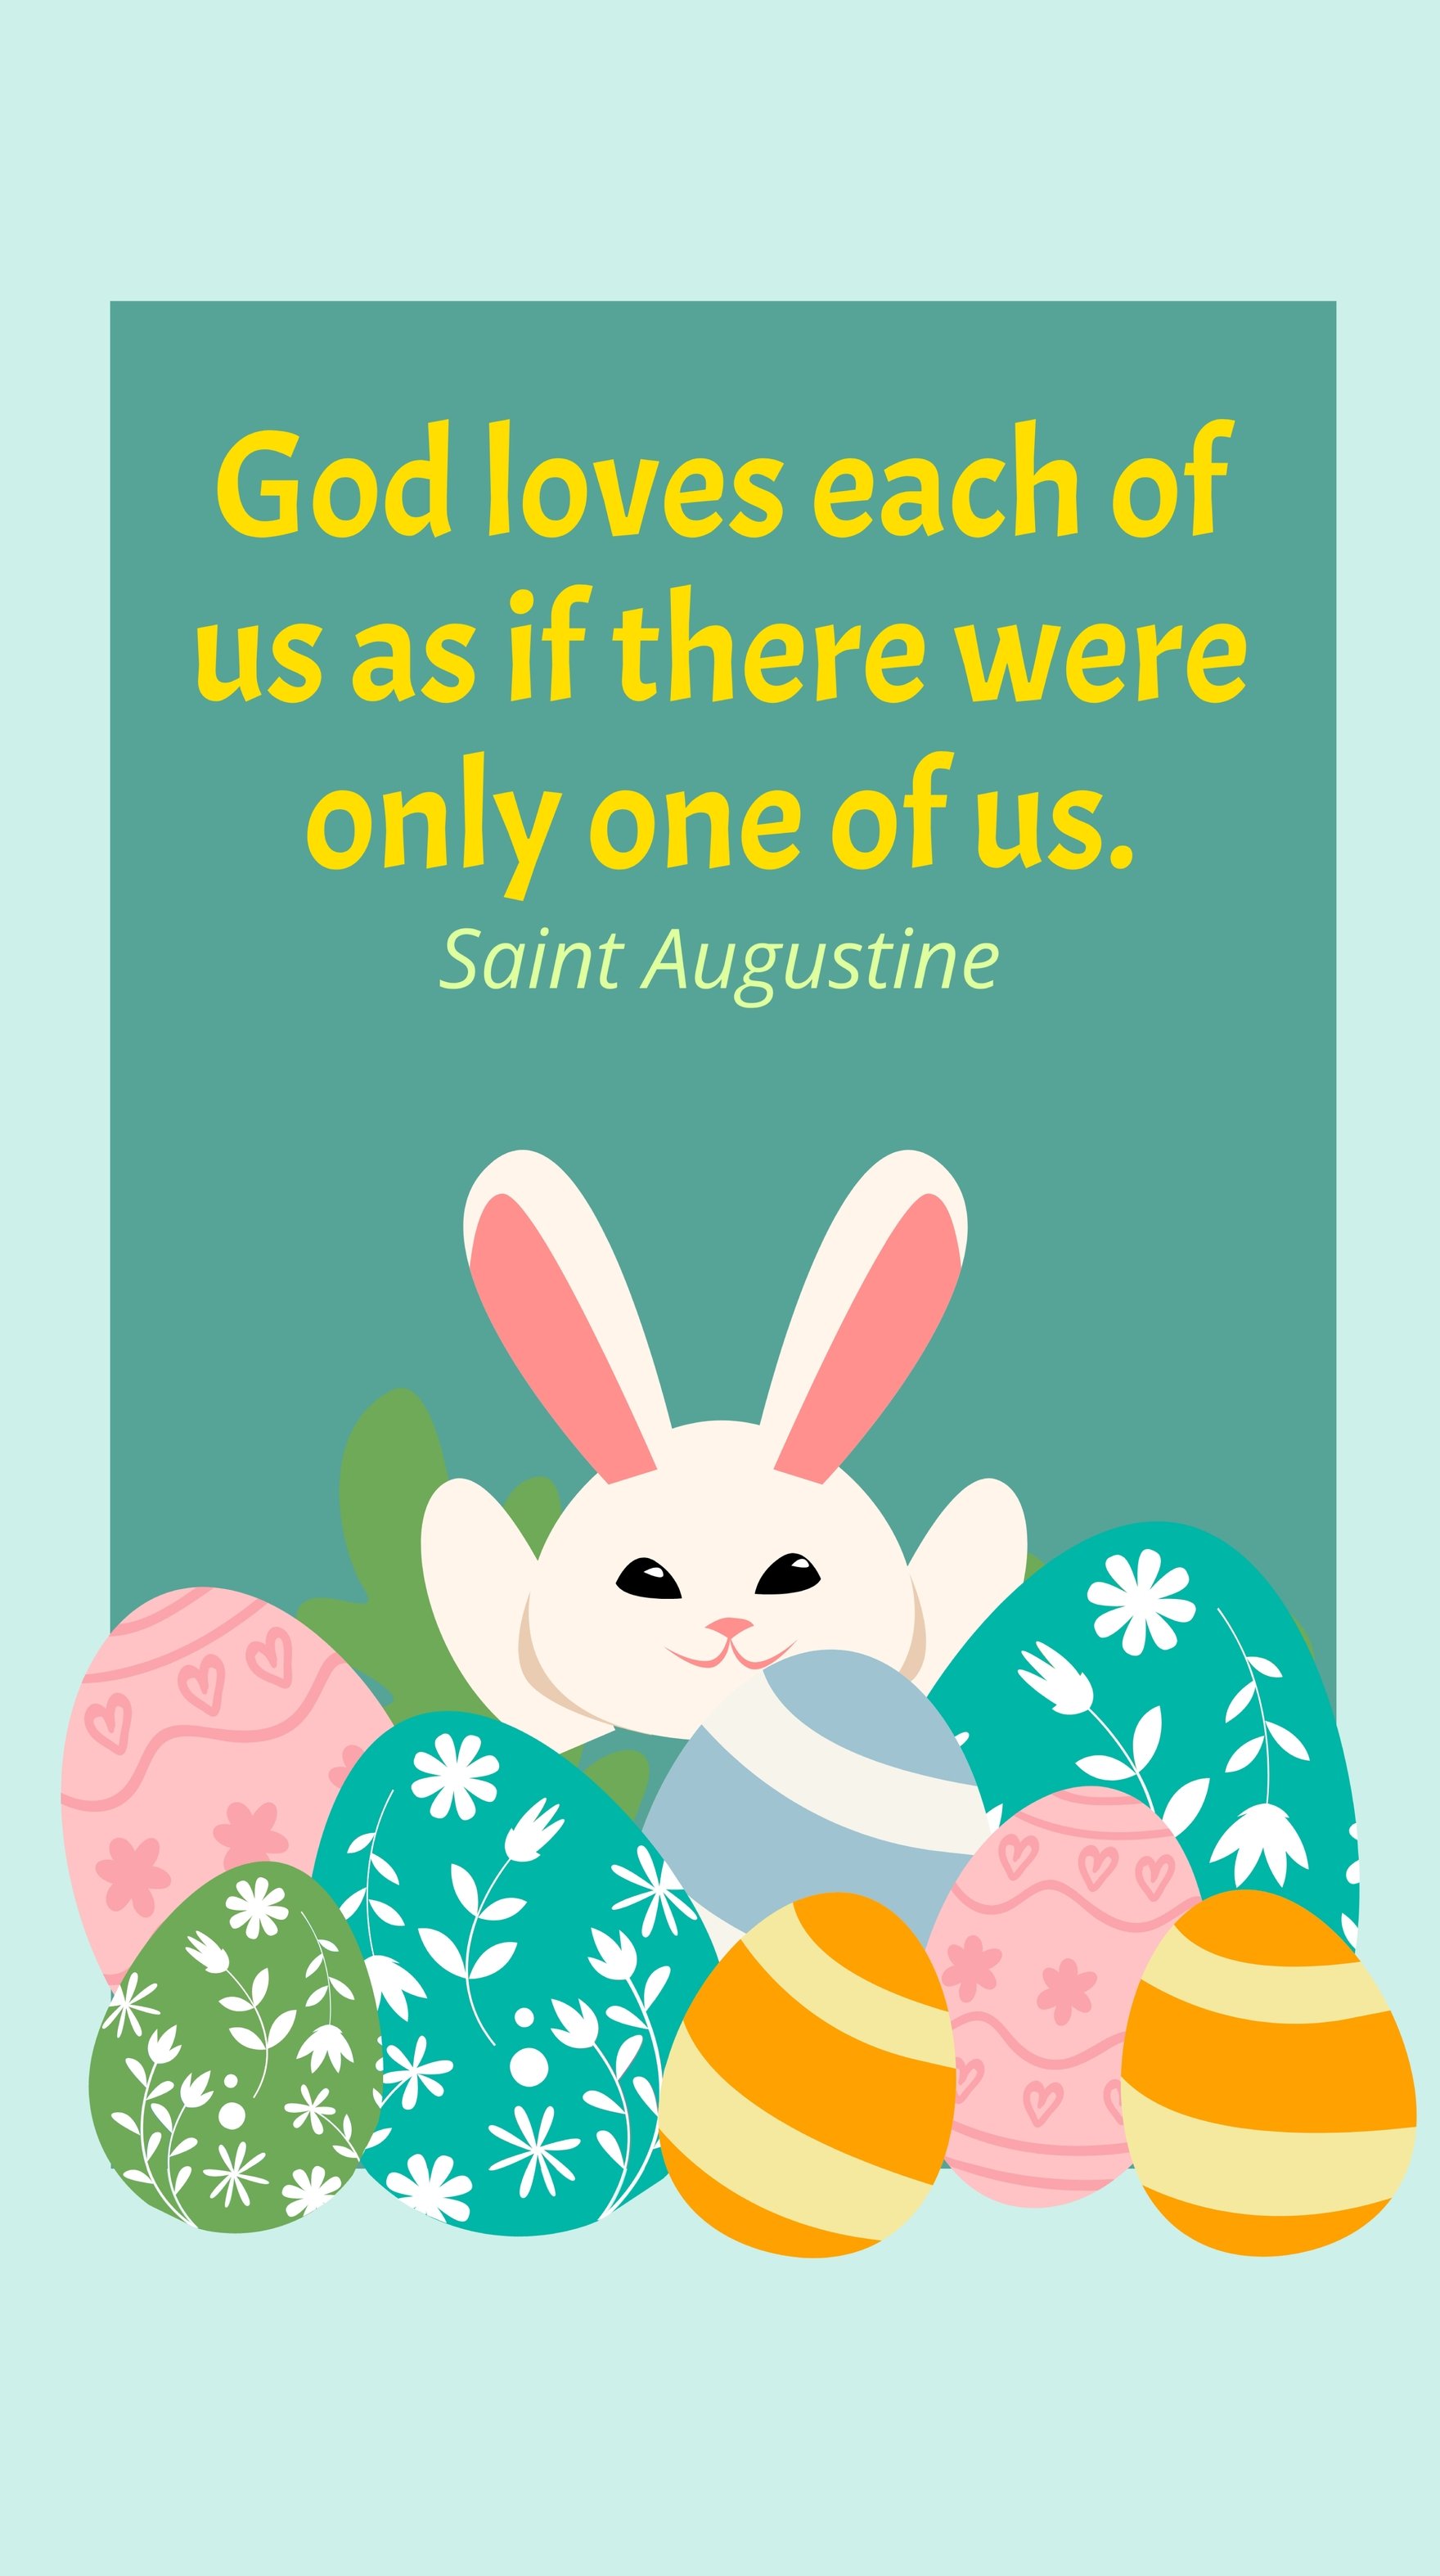 Free Saint Augustine - God loves each of us as if there were only one of us.